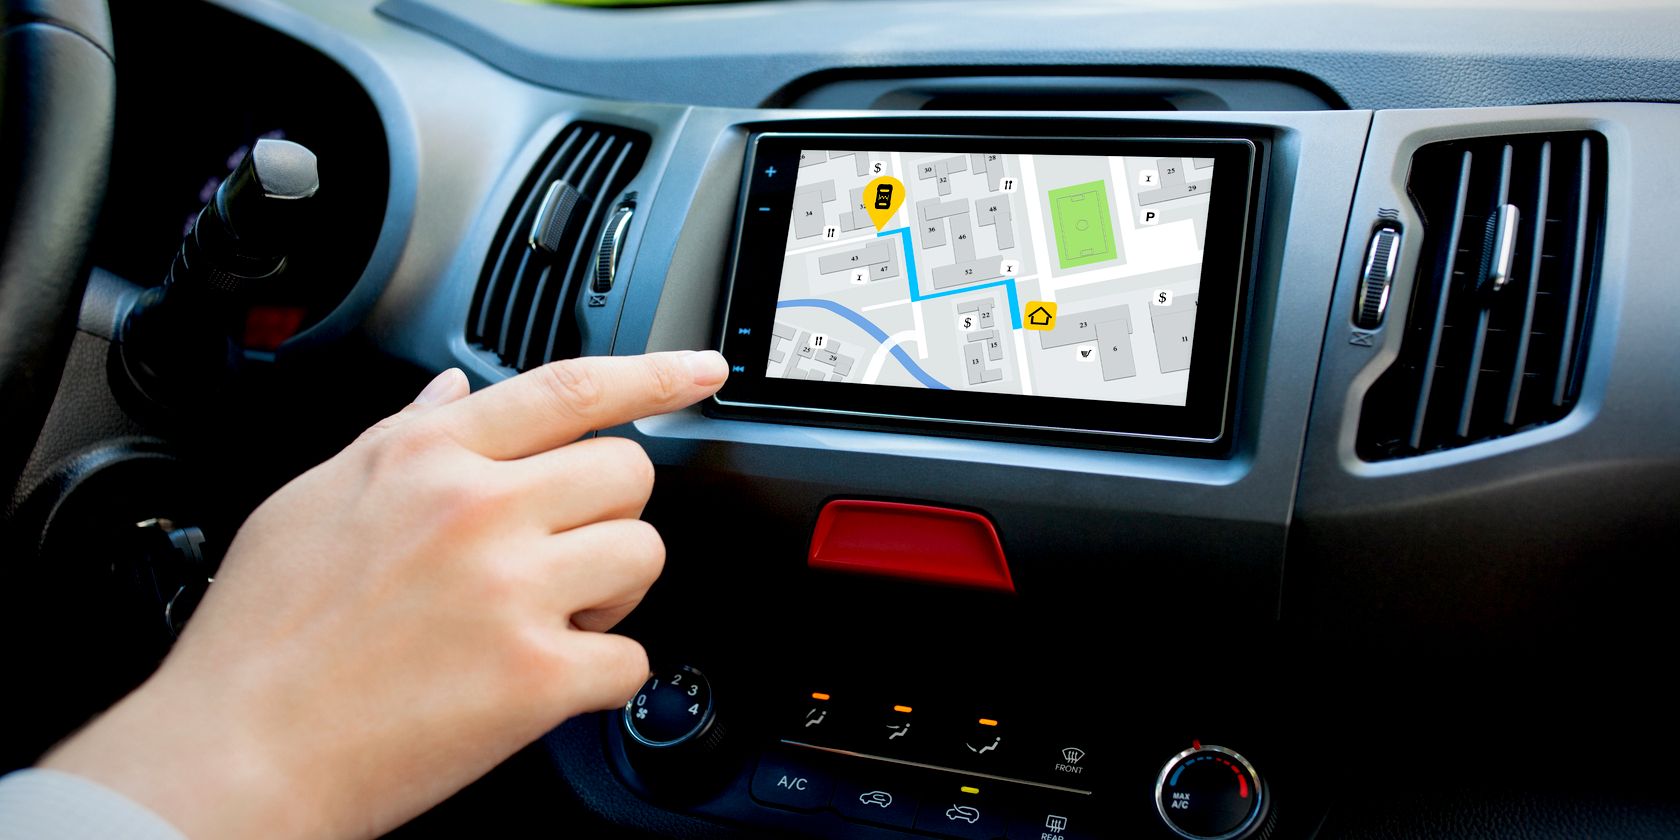 Modern Navigation Systems for Today's Vehicles